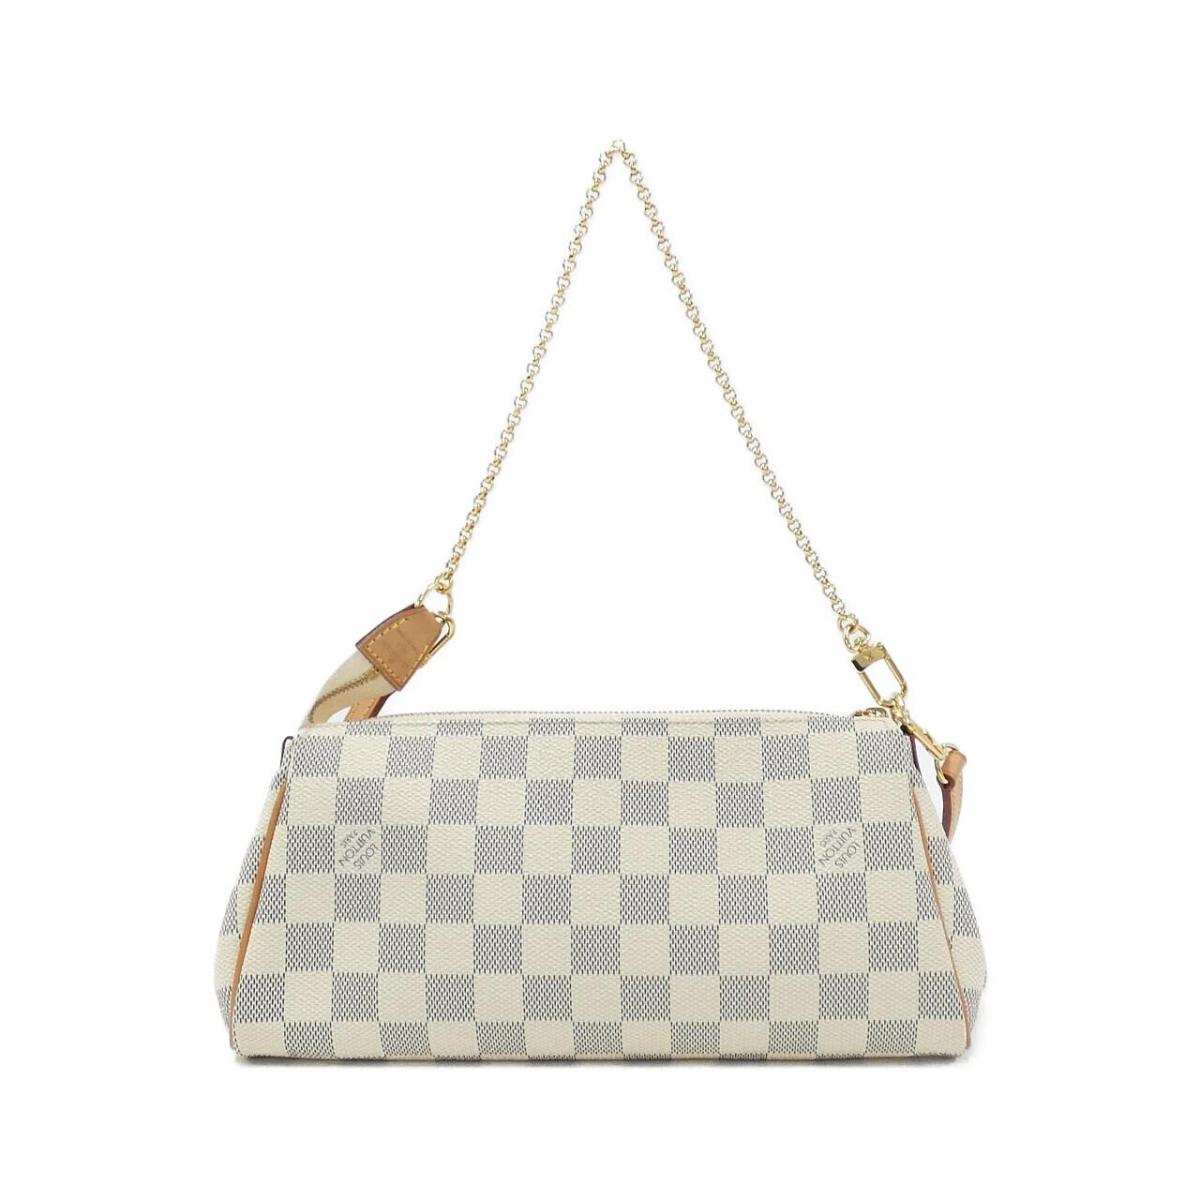 LOUIS VUITTON ルイヴィトン ダミエ アズール エヴァ N55214